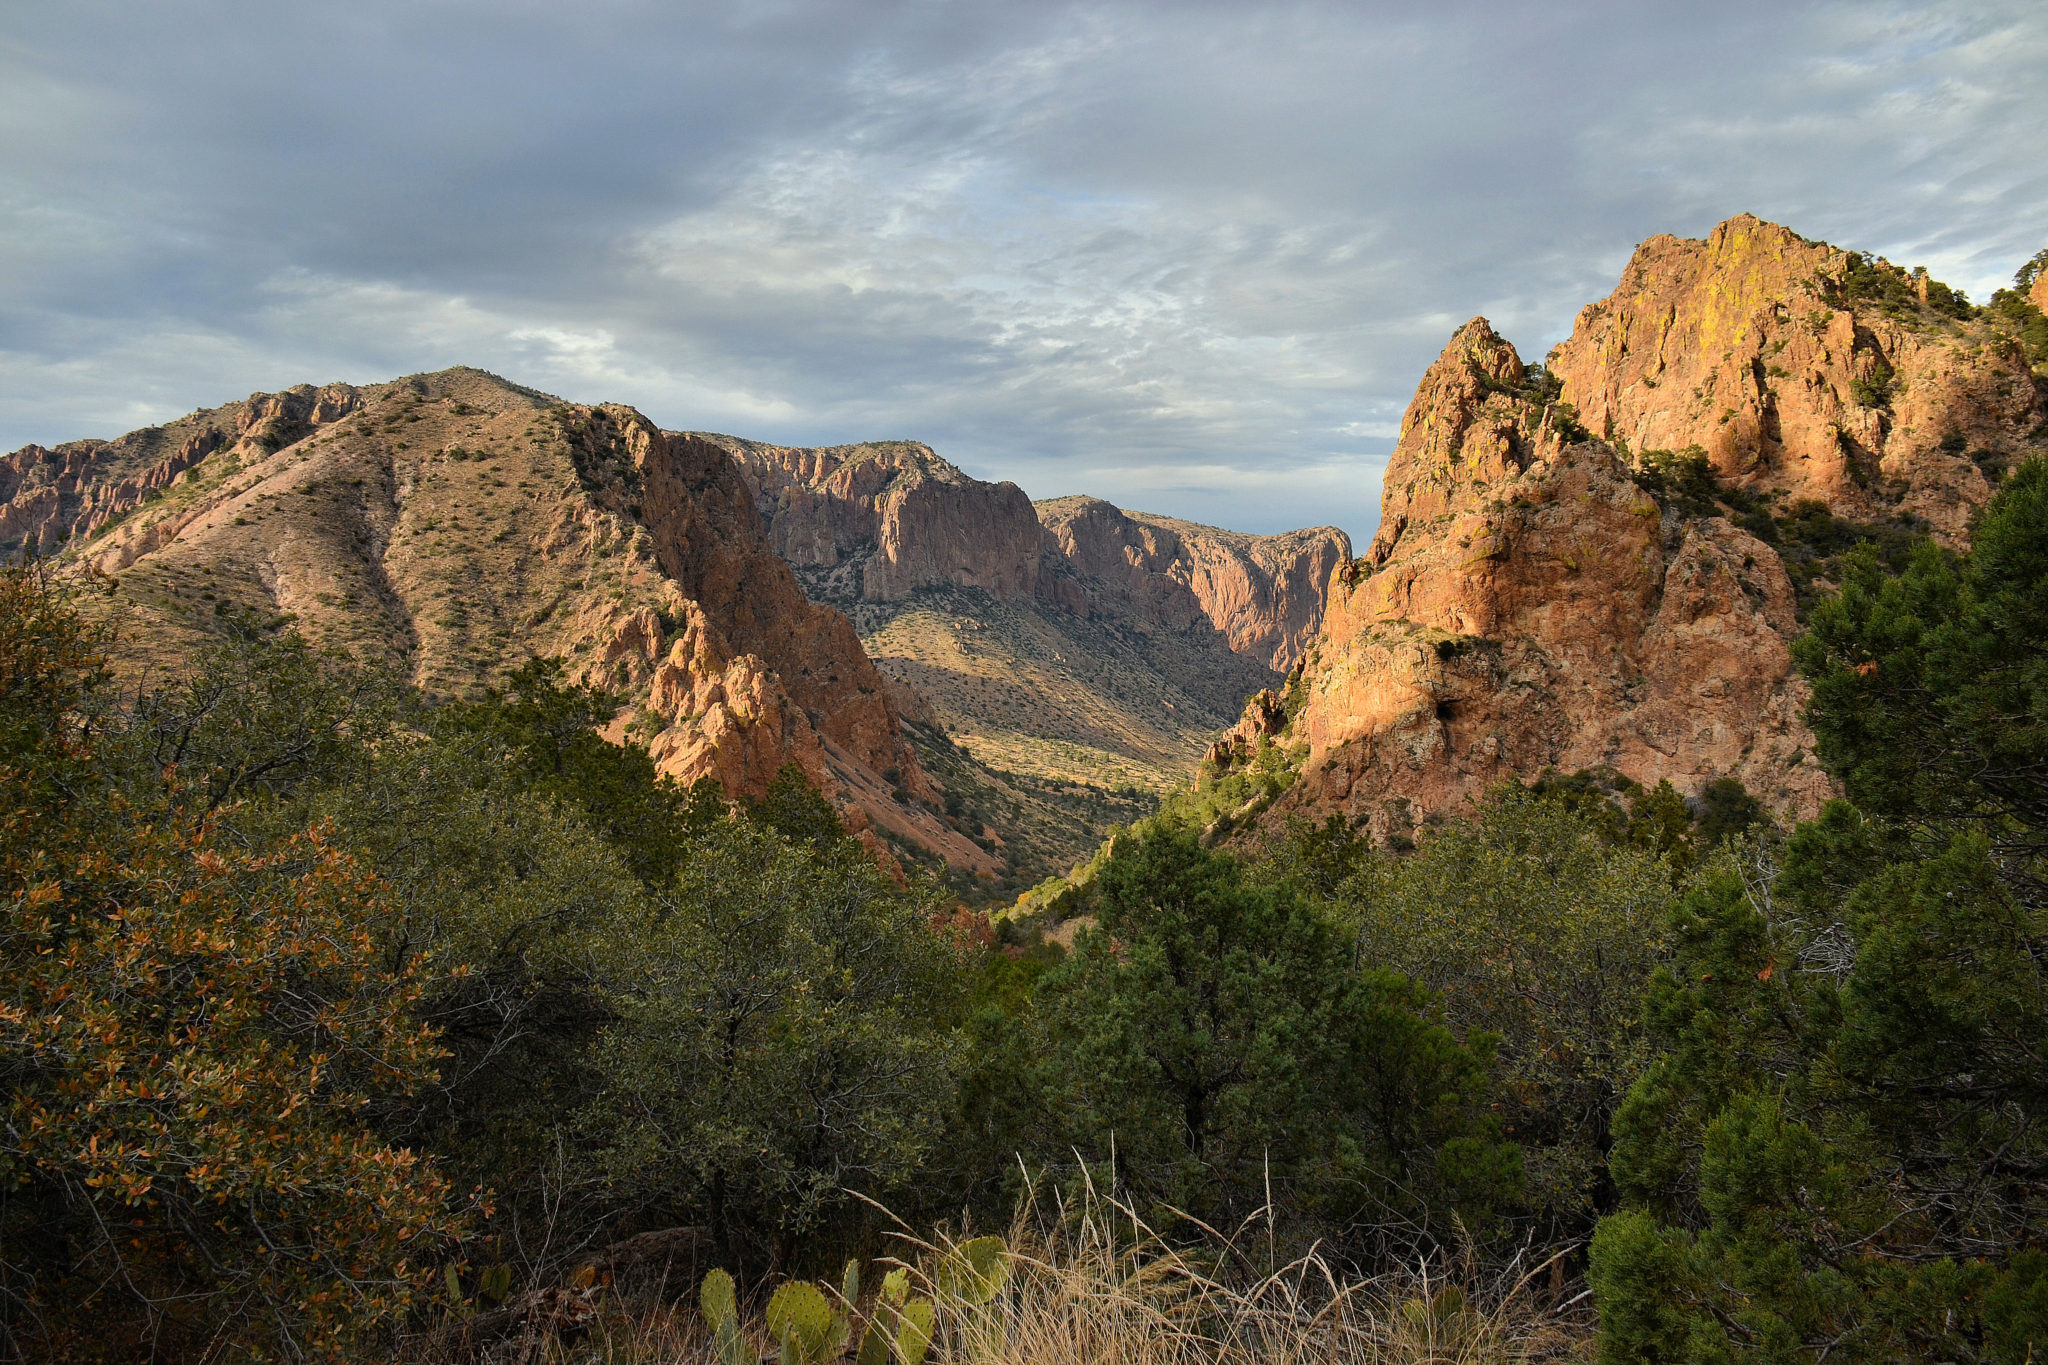 View of the Chisos Mountains from Lost Mine Trail